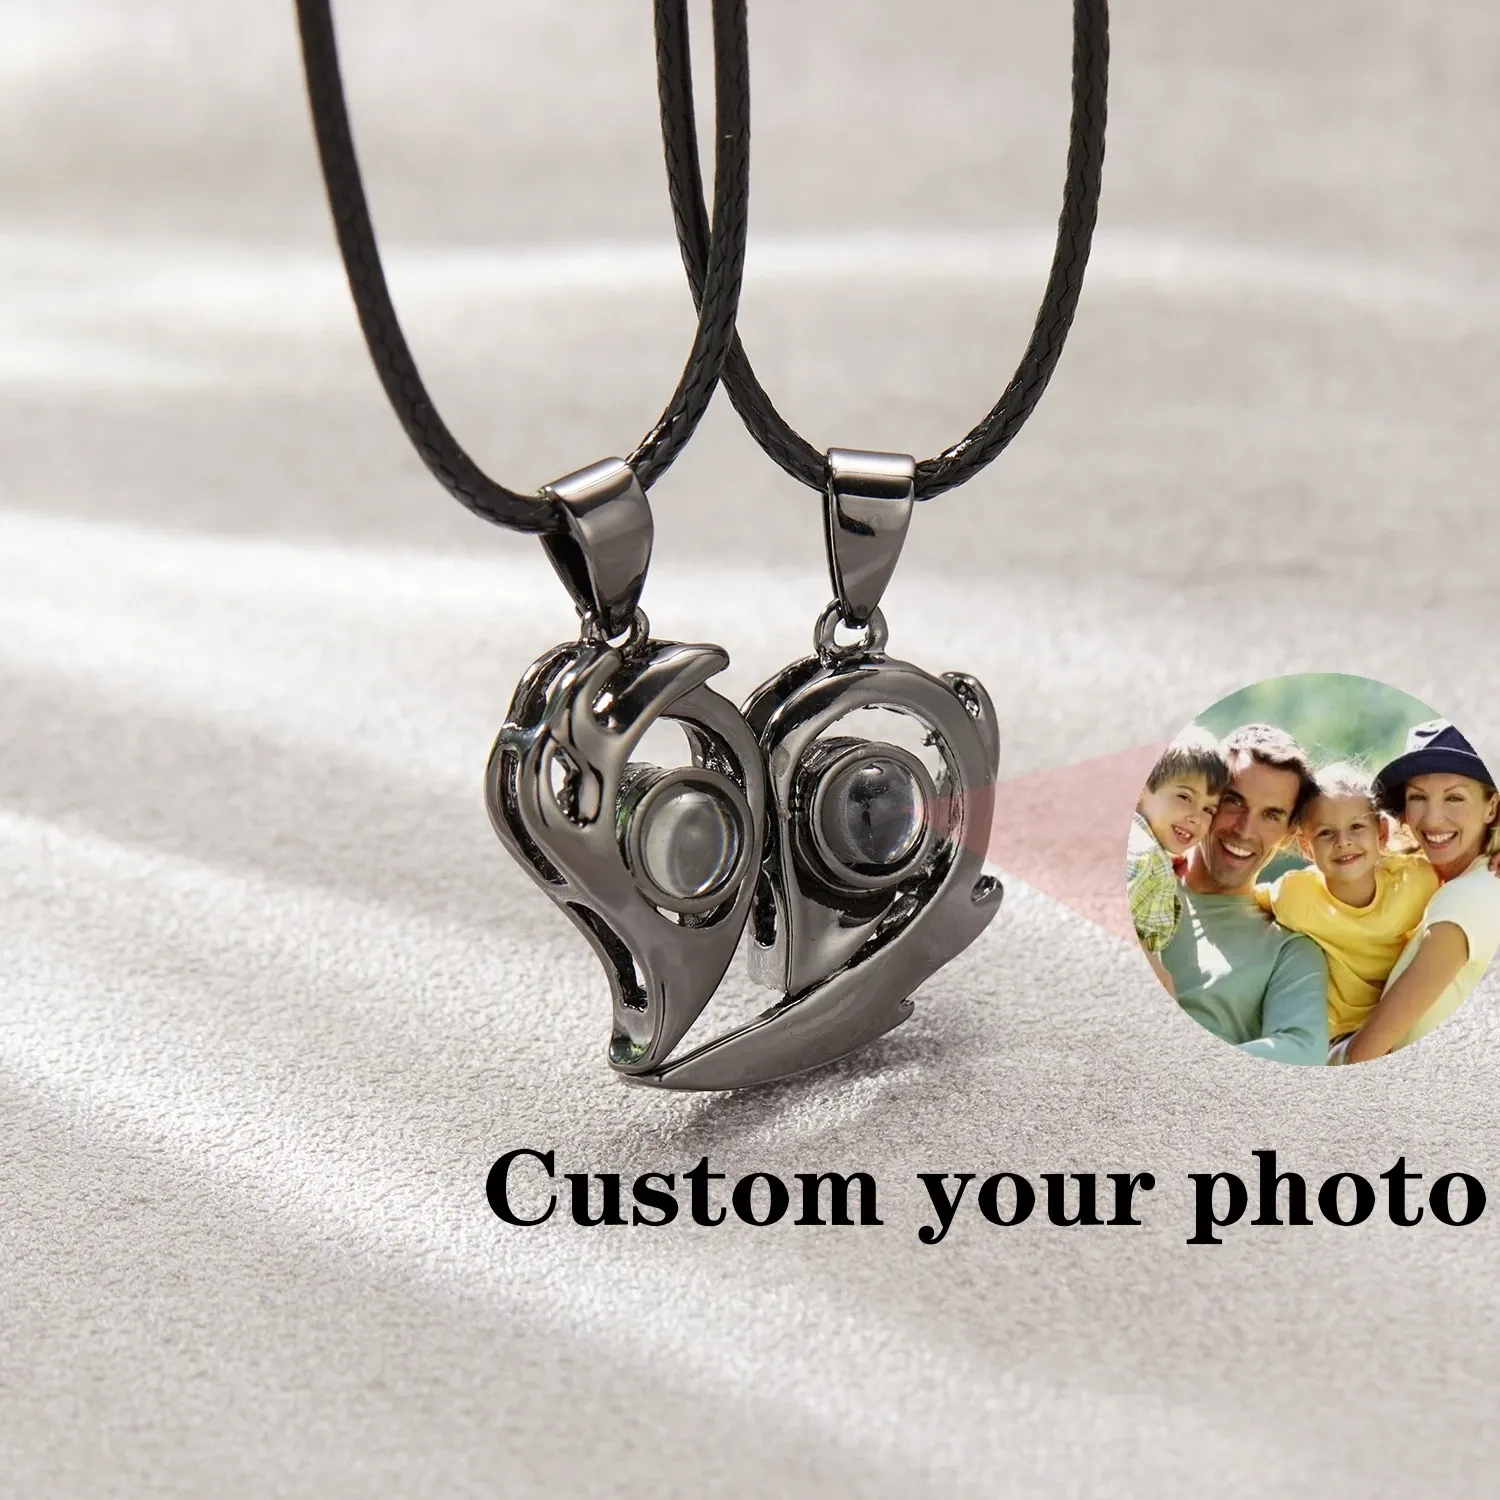 Necklaces 1PAIR Leather Custom Photo Projection Necklace Magnetic Couple Colorful Image Heart Pendant Jewelry Lover Personalized Gifts